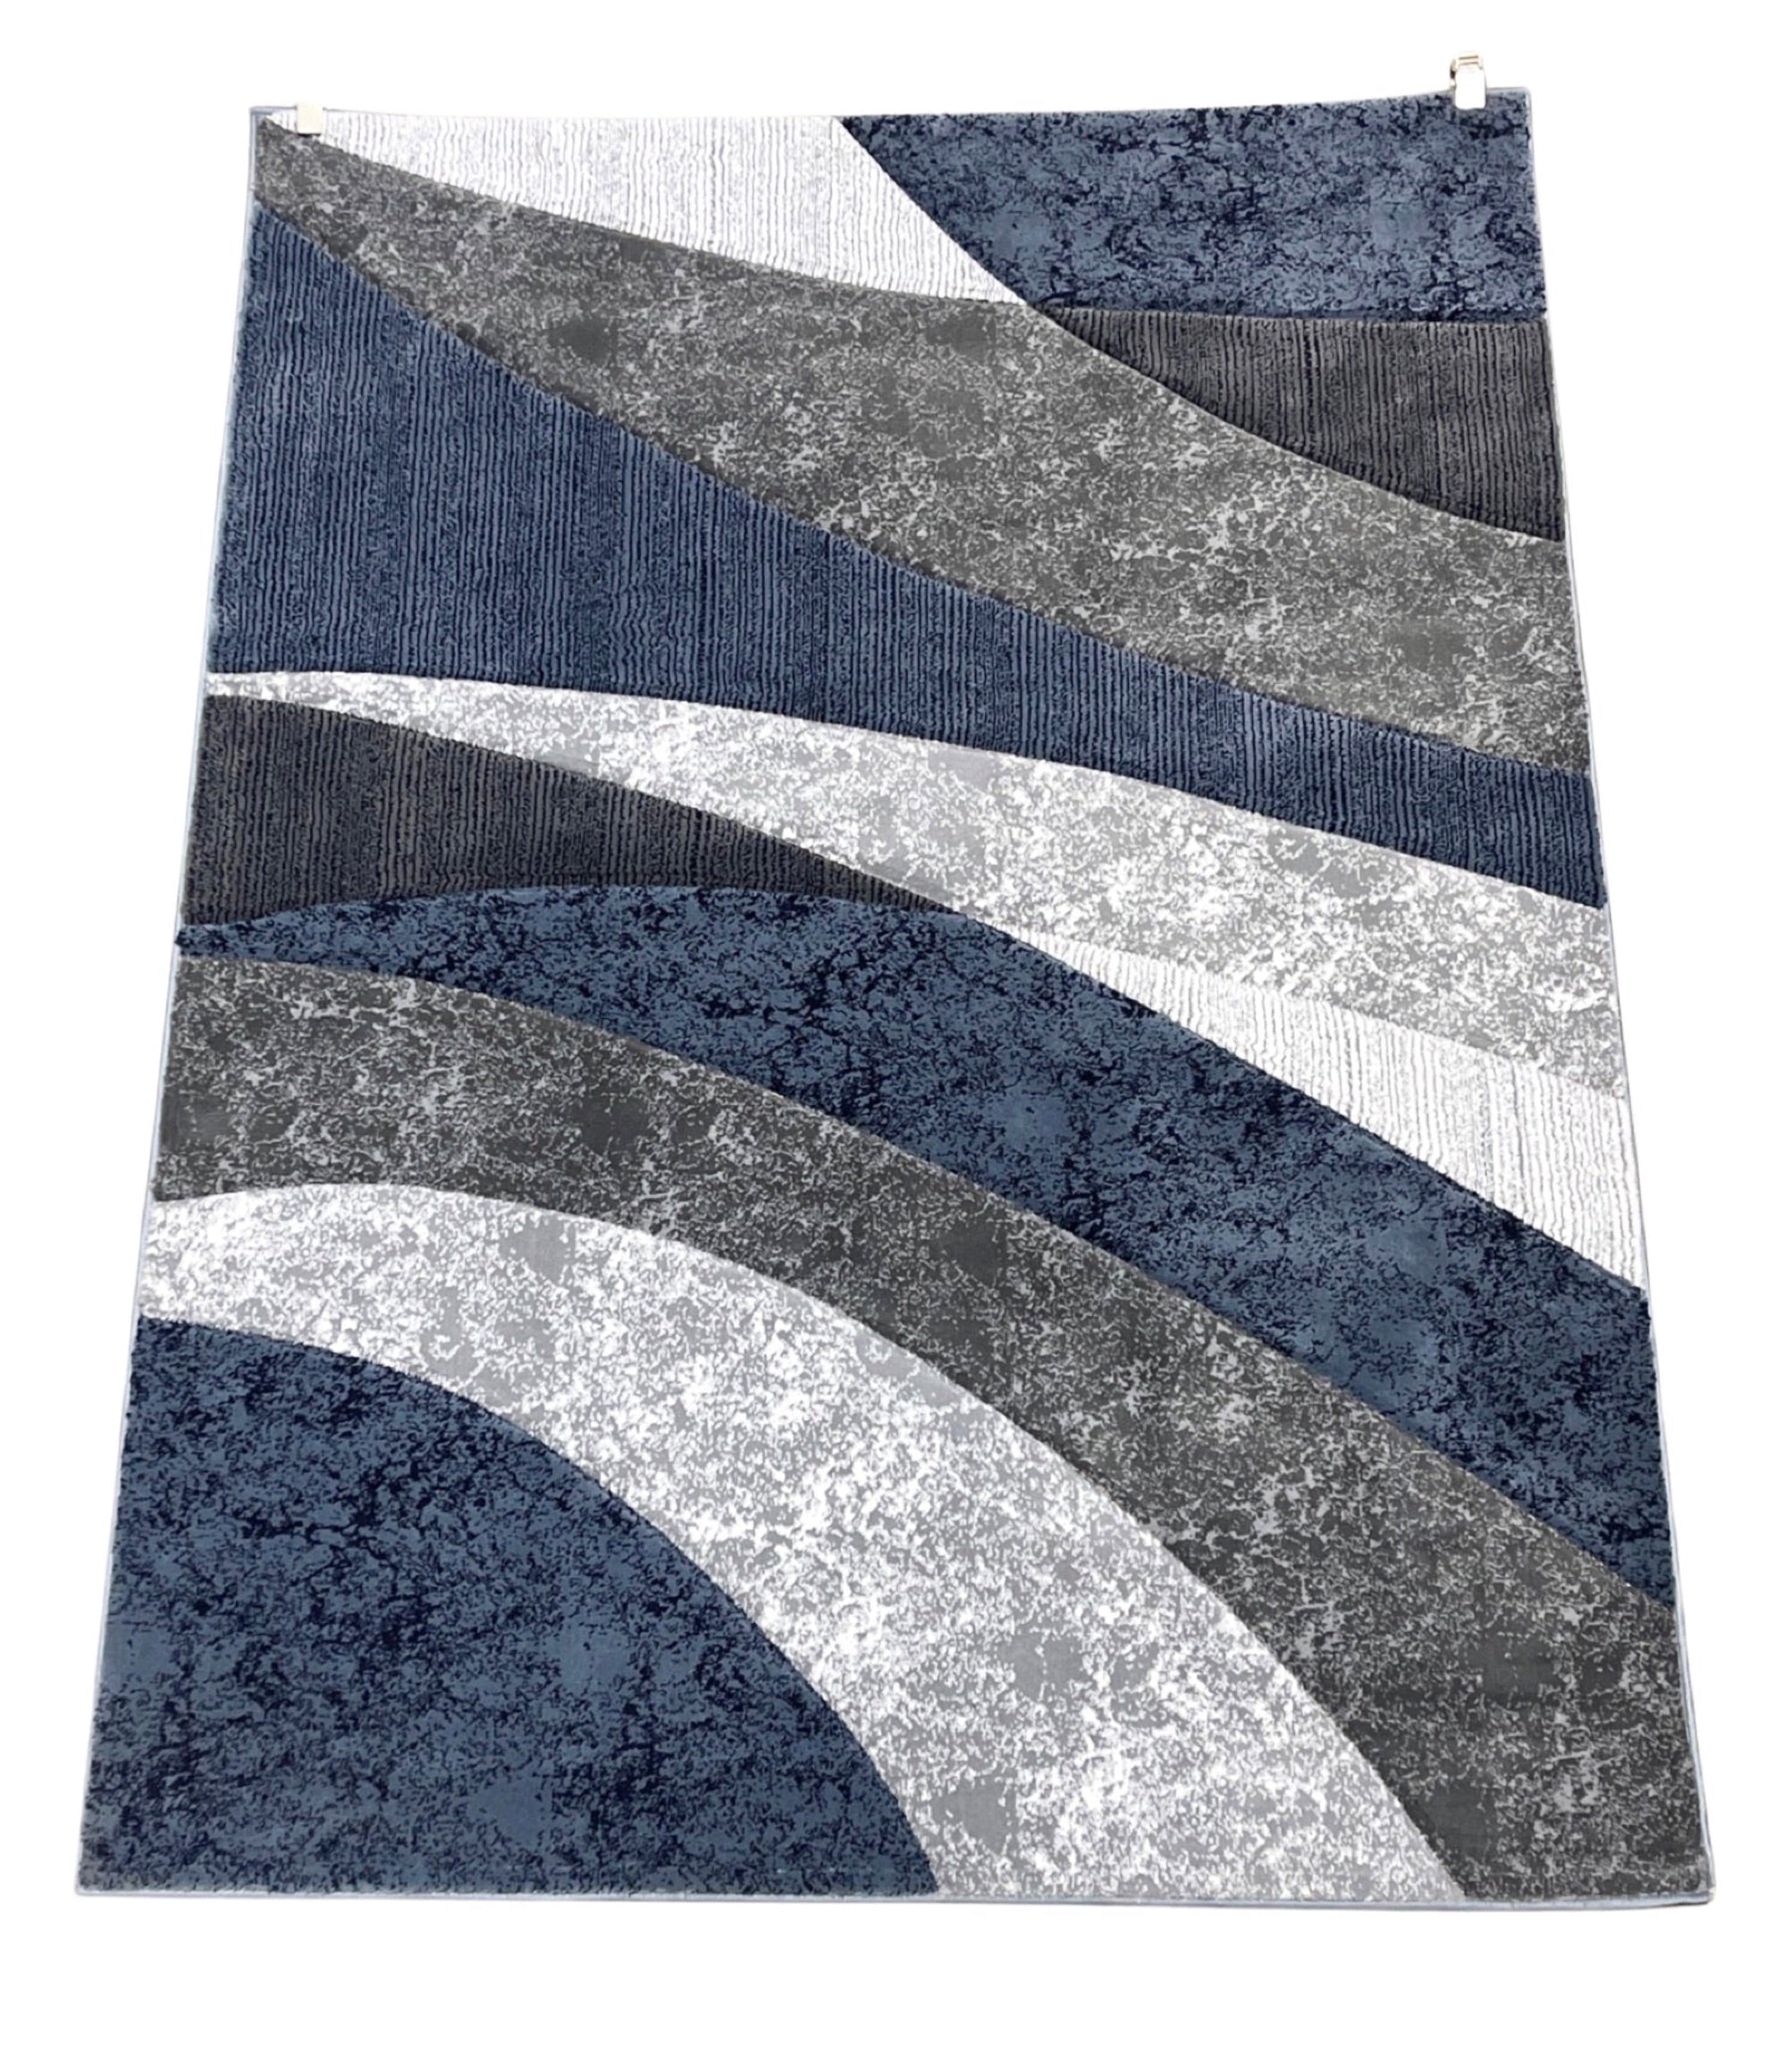 Modern 5' x 8' Carved Stitched Joy Collection Area Rug- Navy, Grey, White